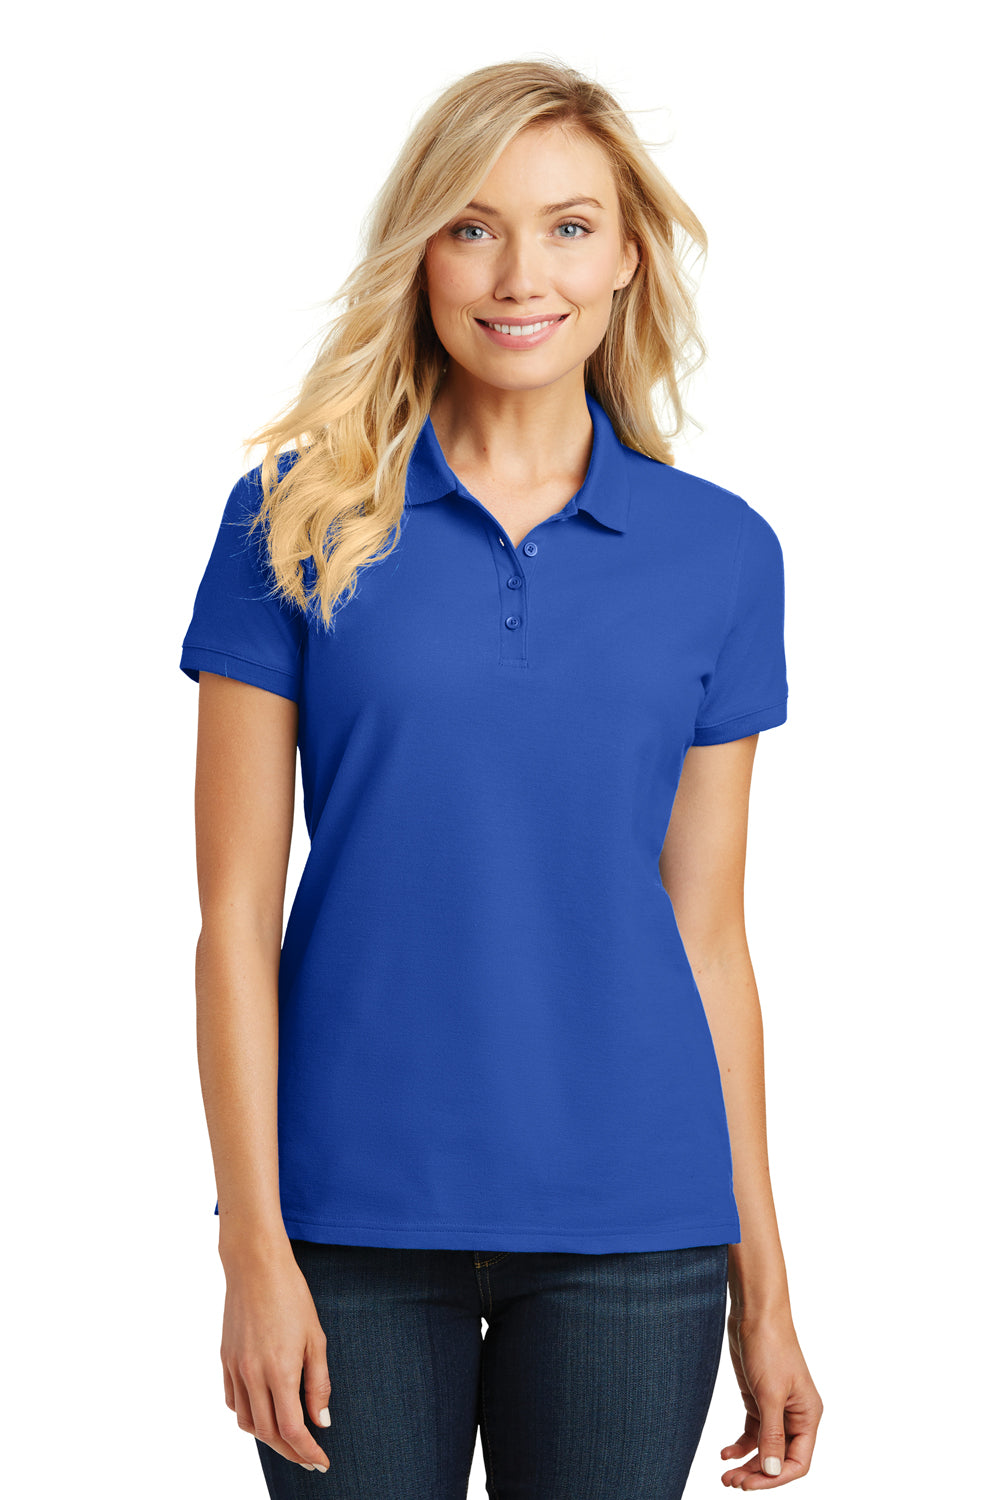 Port Authority L100 Womens Core Classic Short Sleeve Polo Shirt Royal Blue Front